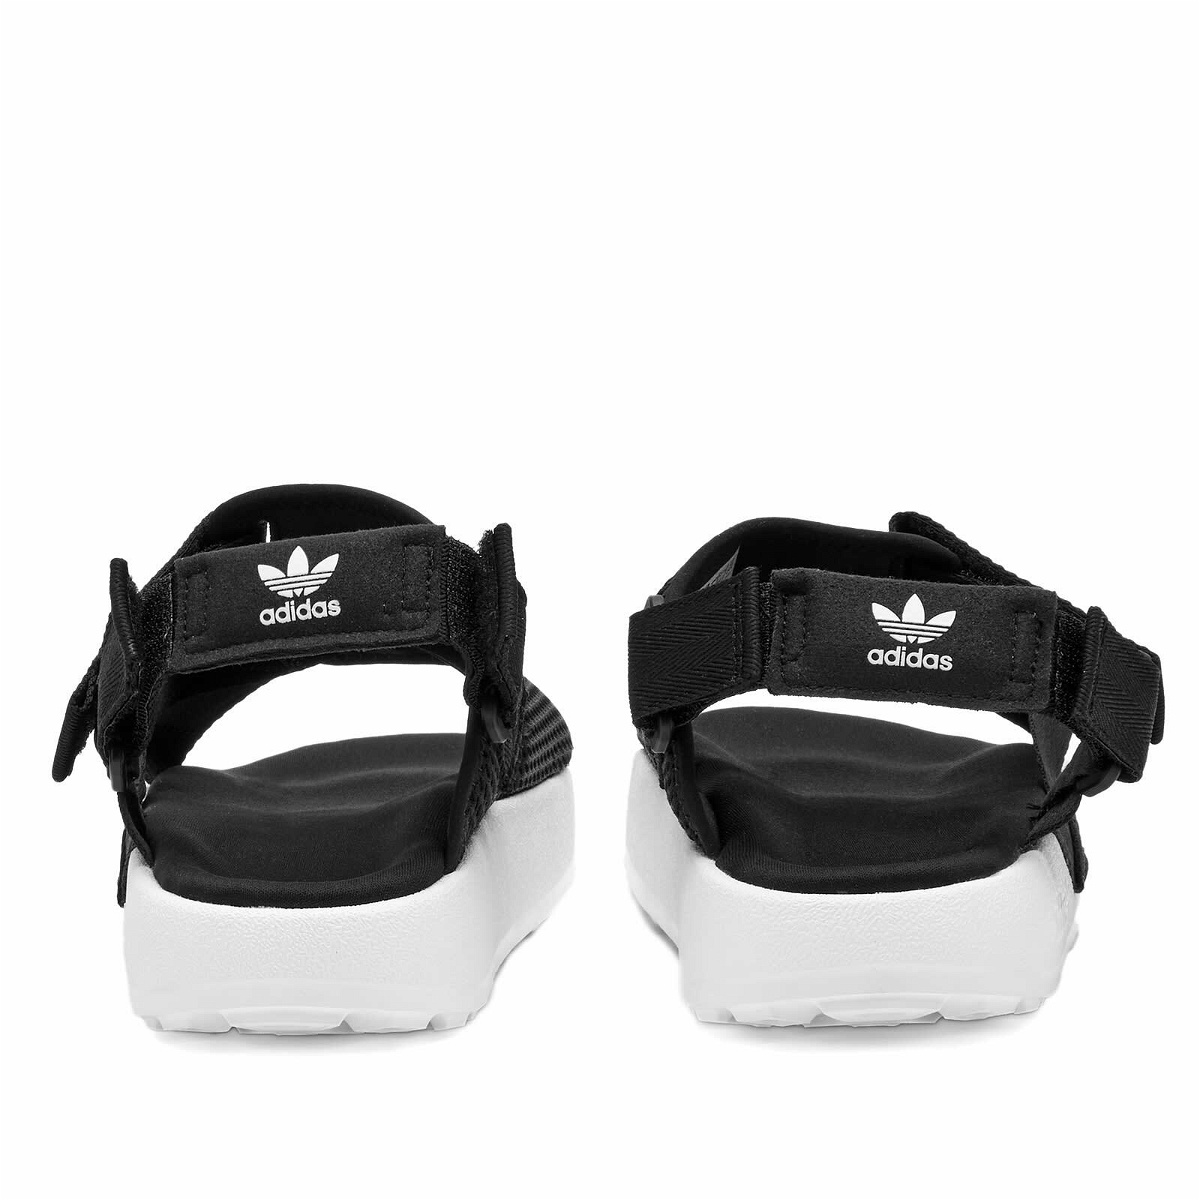 Adidas WHITE/BLACK SLIDES SLIPPERS ::PARMAR BOOT HOUSE | Buy Footwear and  Accessories For Men, Women & Kids